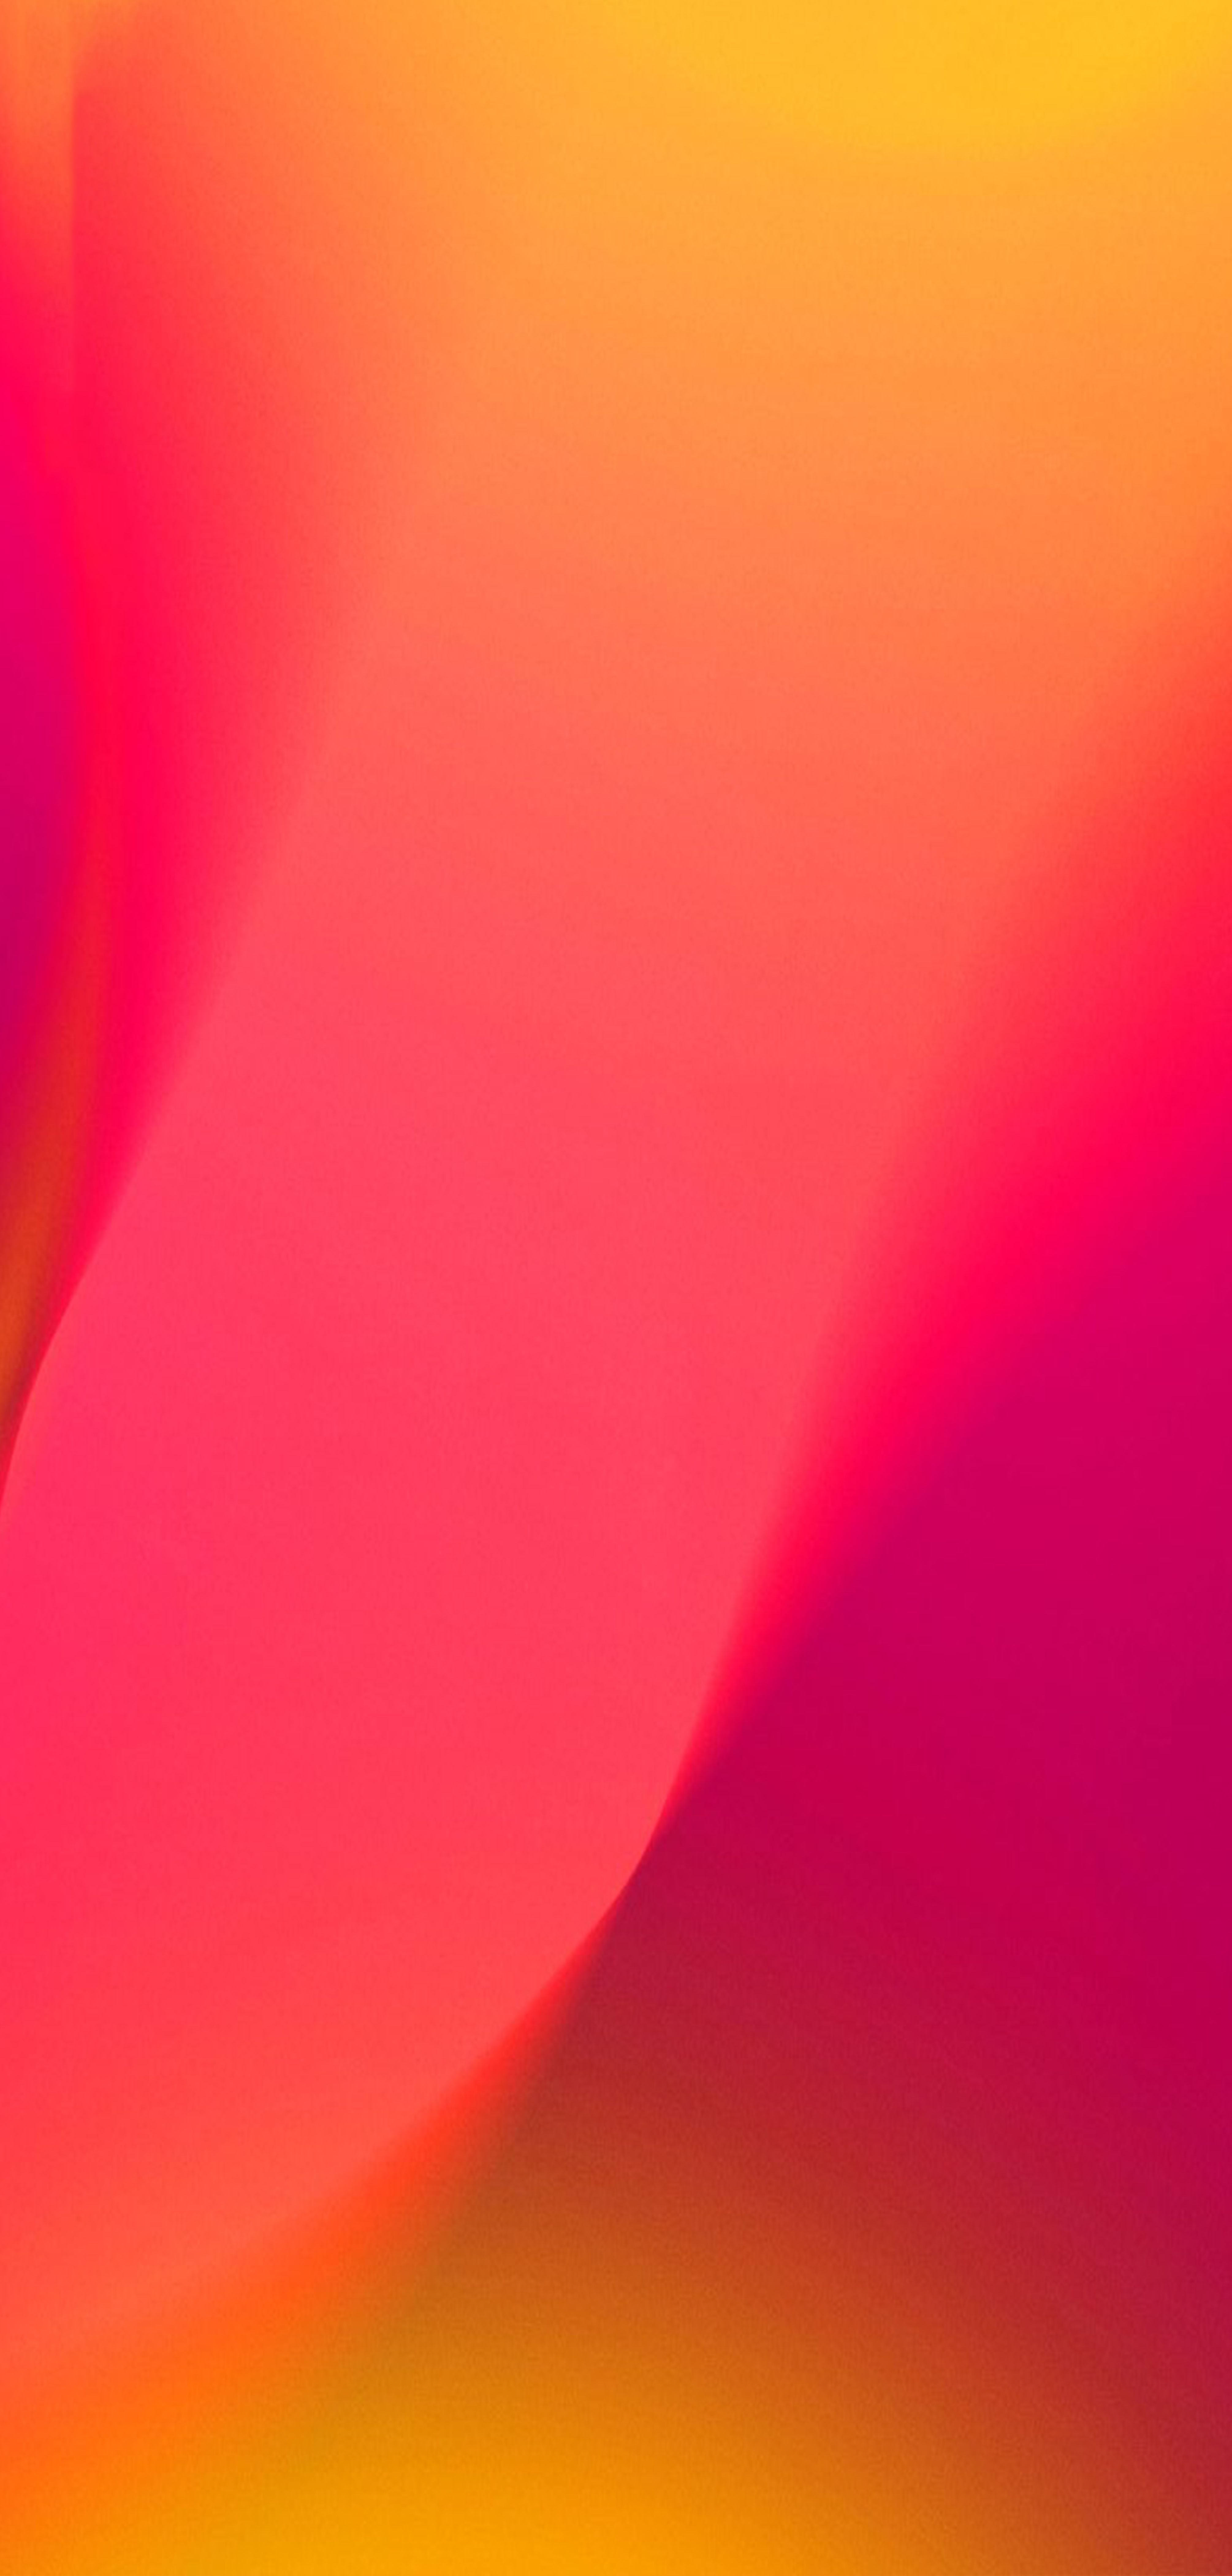 iPhone and Android Wallpaper: Vibrant Shapes & Gradients